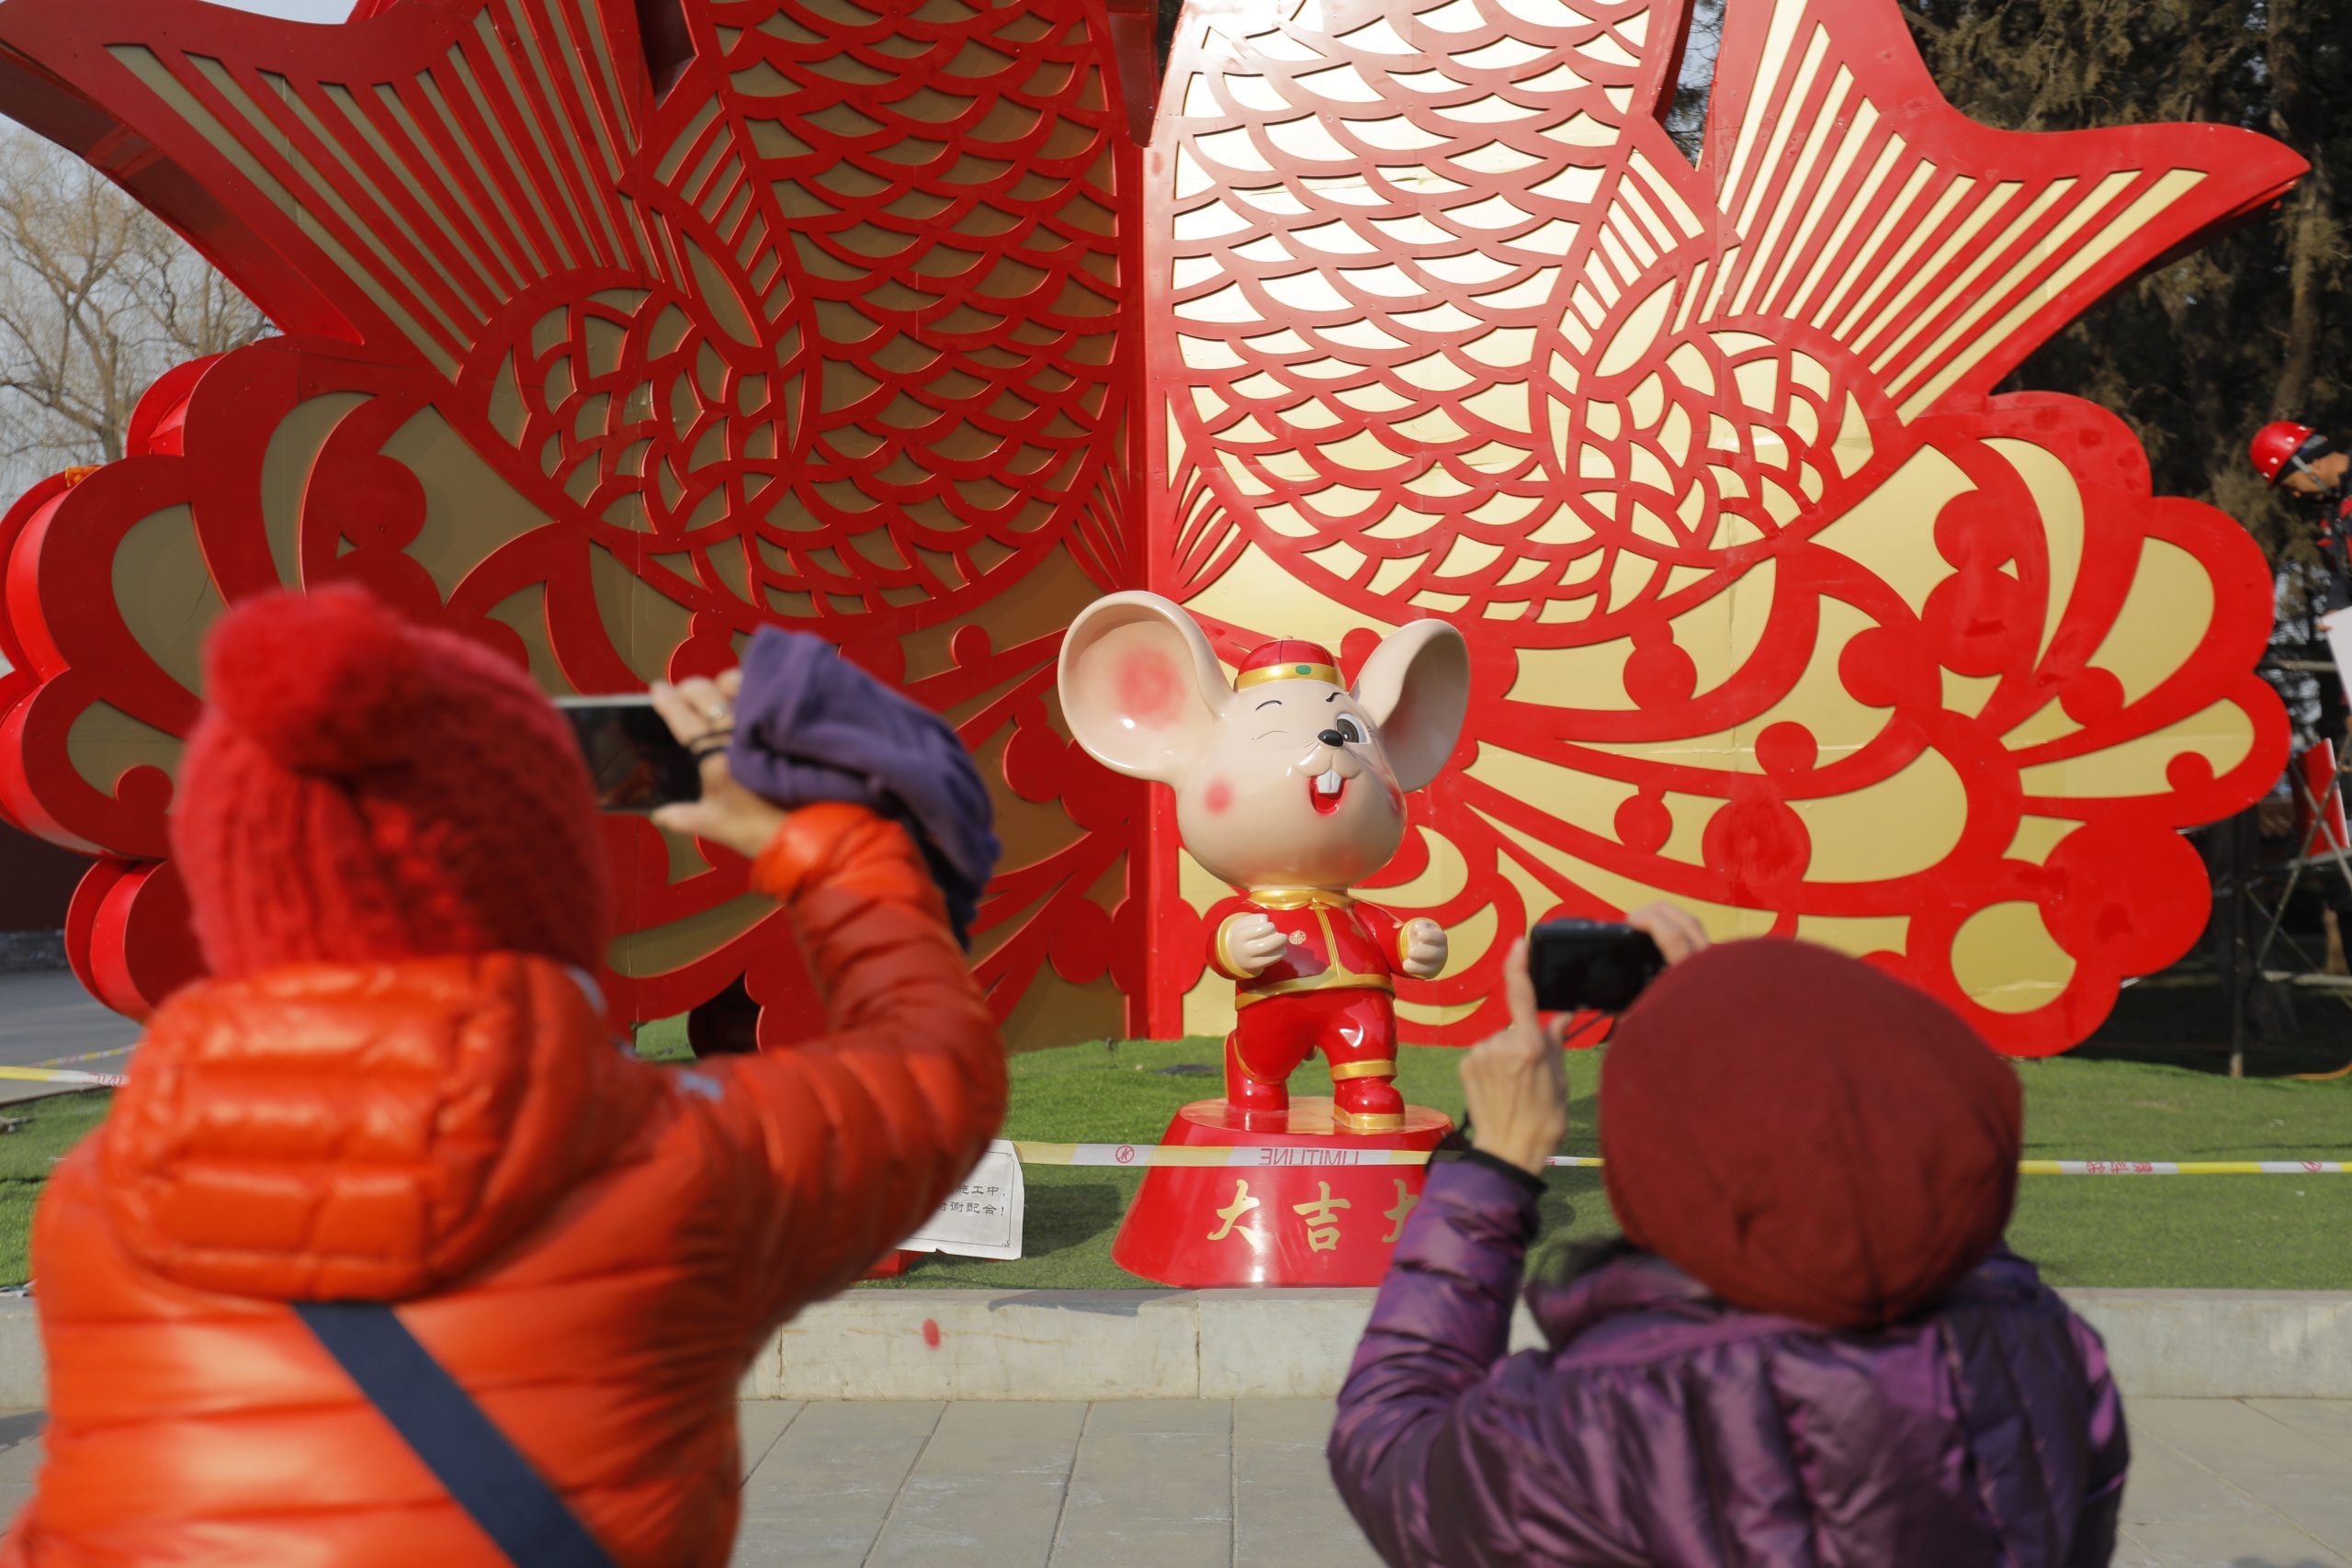 epa08146462 People take photos of a rat sculpture ahead of the upcoming Chinese Lunar New Year at Ditan Park in Beijing, China, 21 January 2020. The Lunar New Year, also known as Spring Festival in China, falls on 25 January 2020, marking the beginning of the Year of the Rat.  EPA/WU HONG